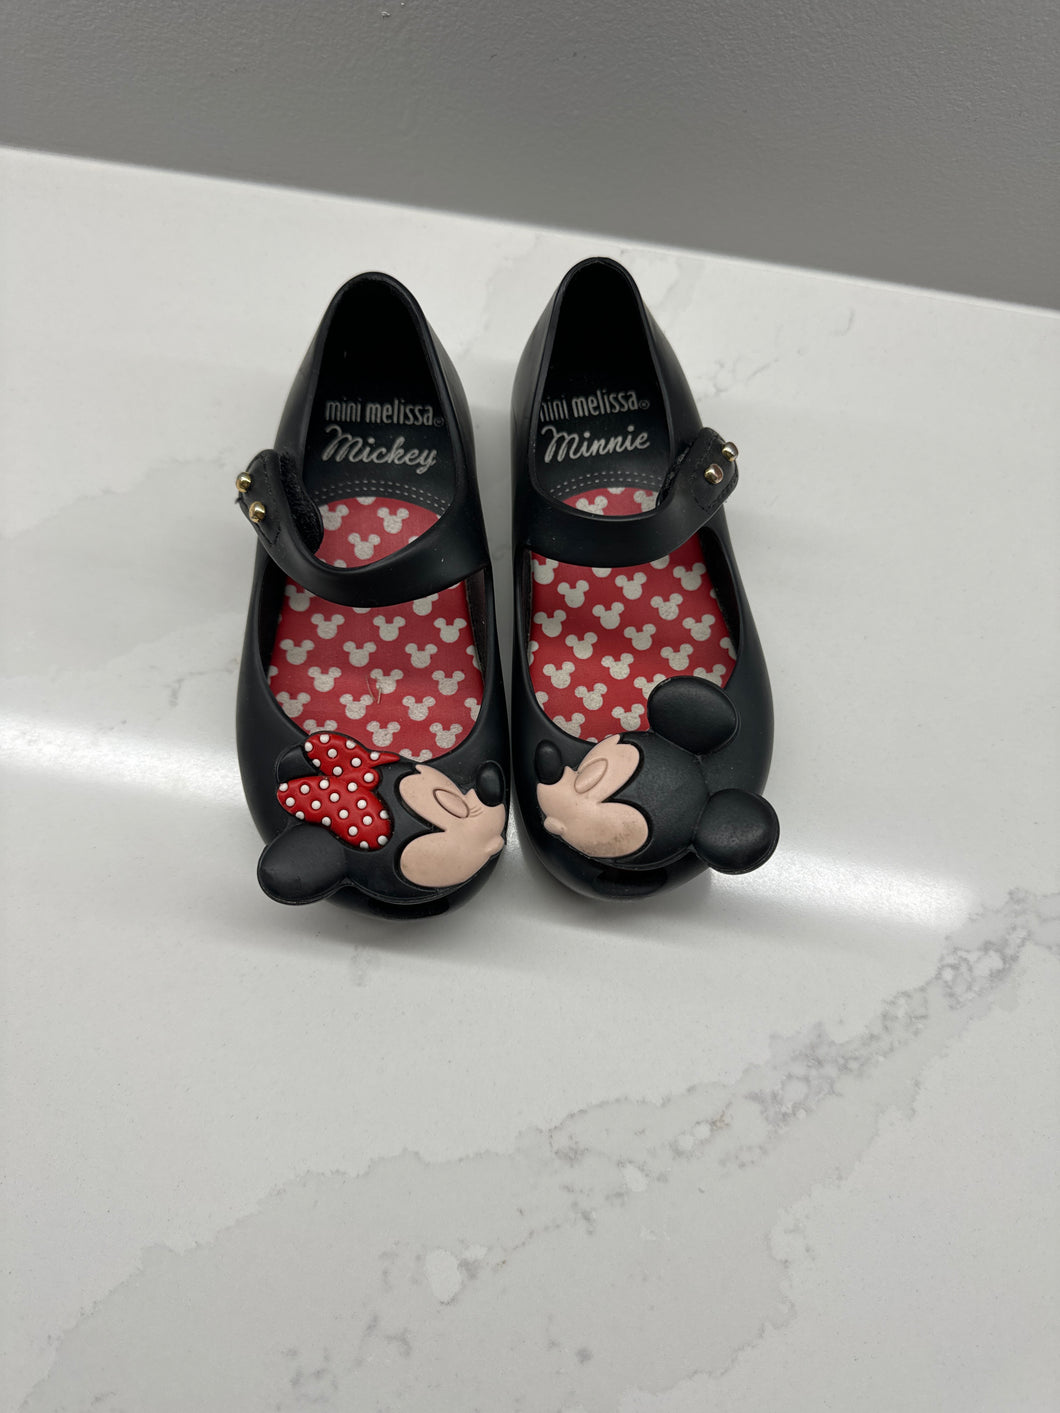 Mini Melissa Mickey and Minnie shoes size toddler 7 7